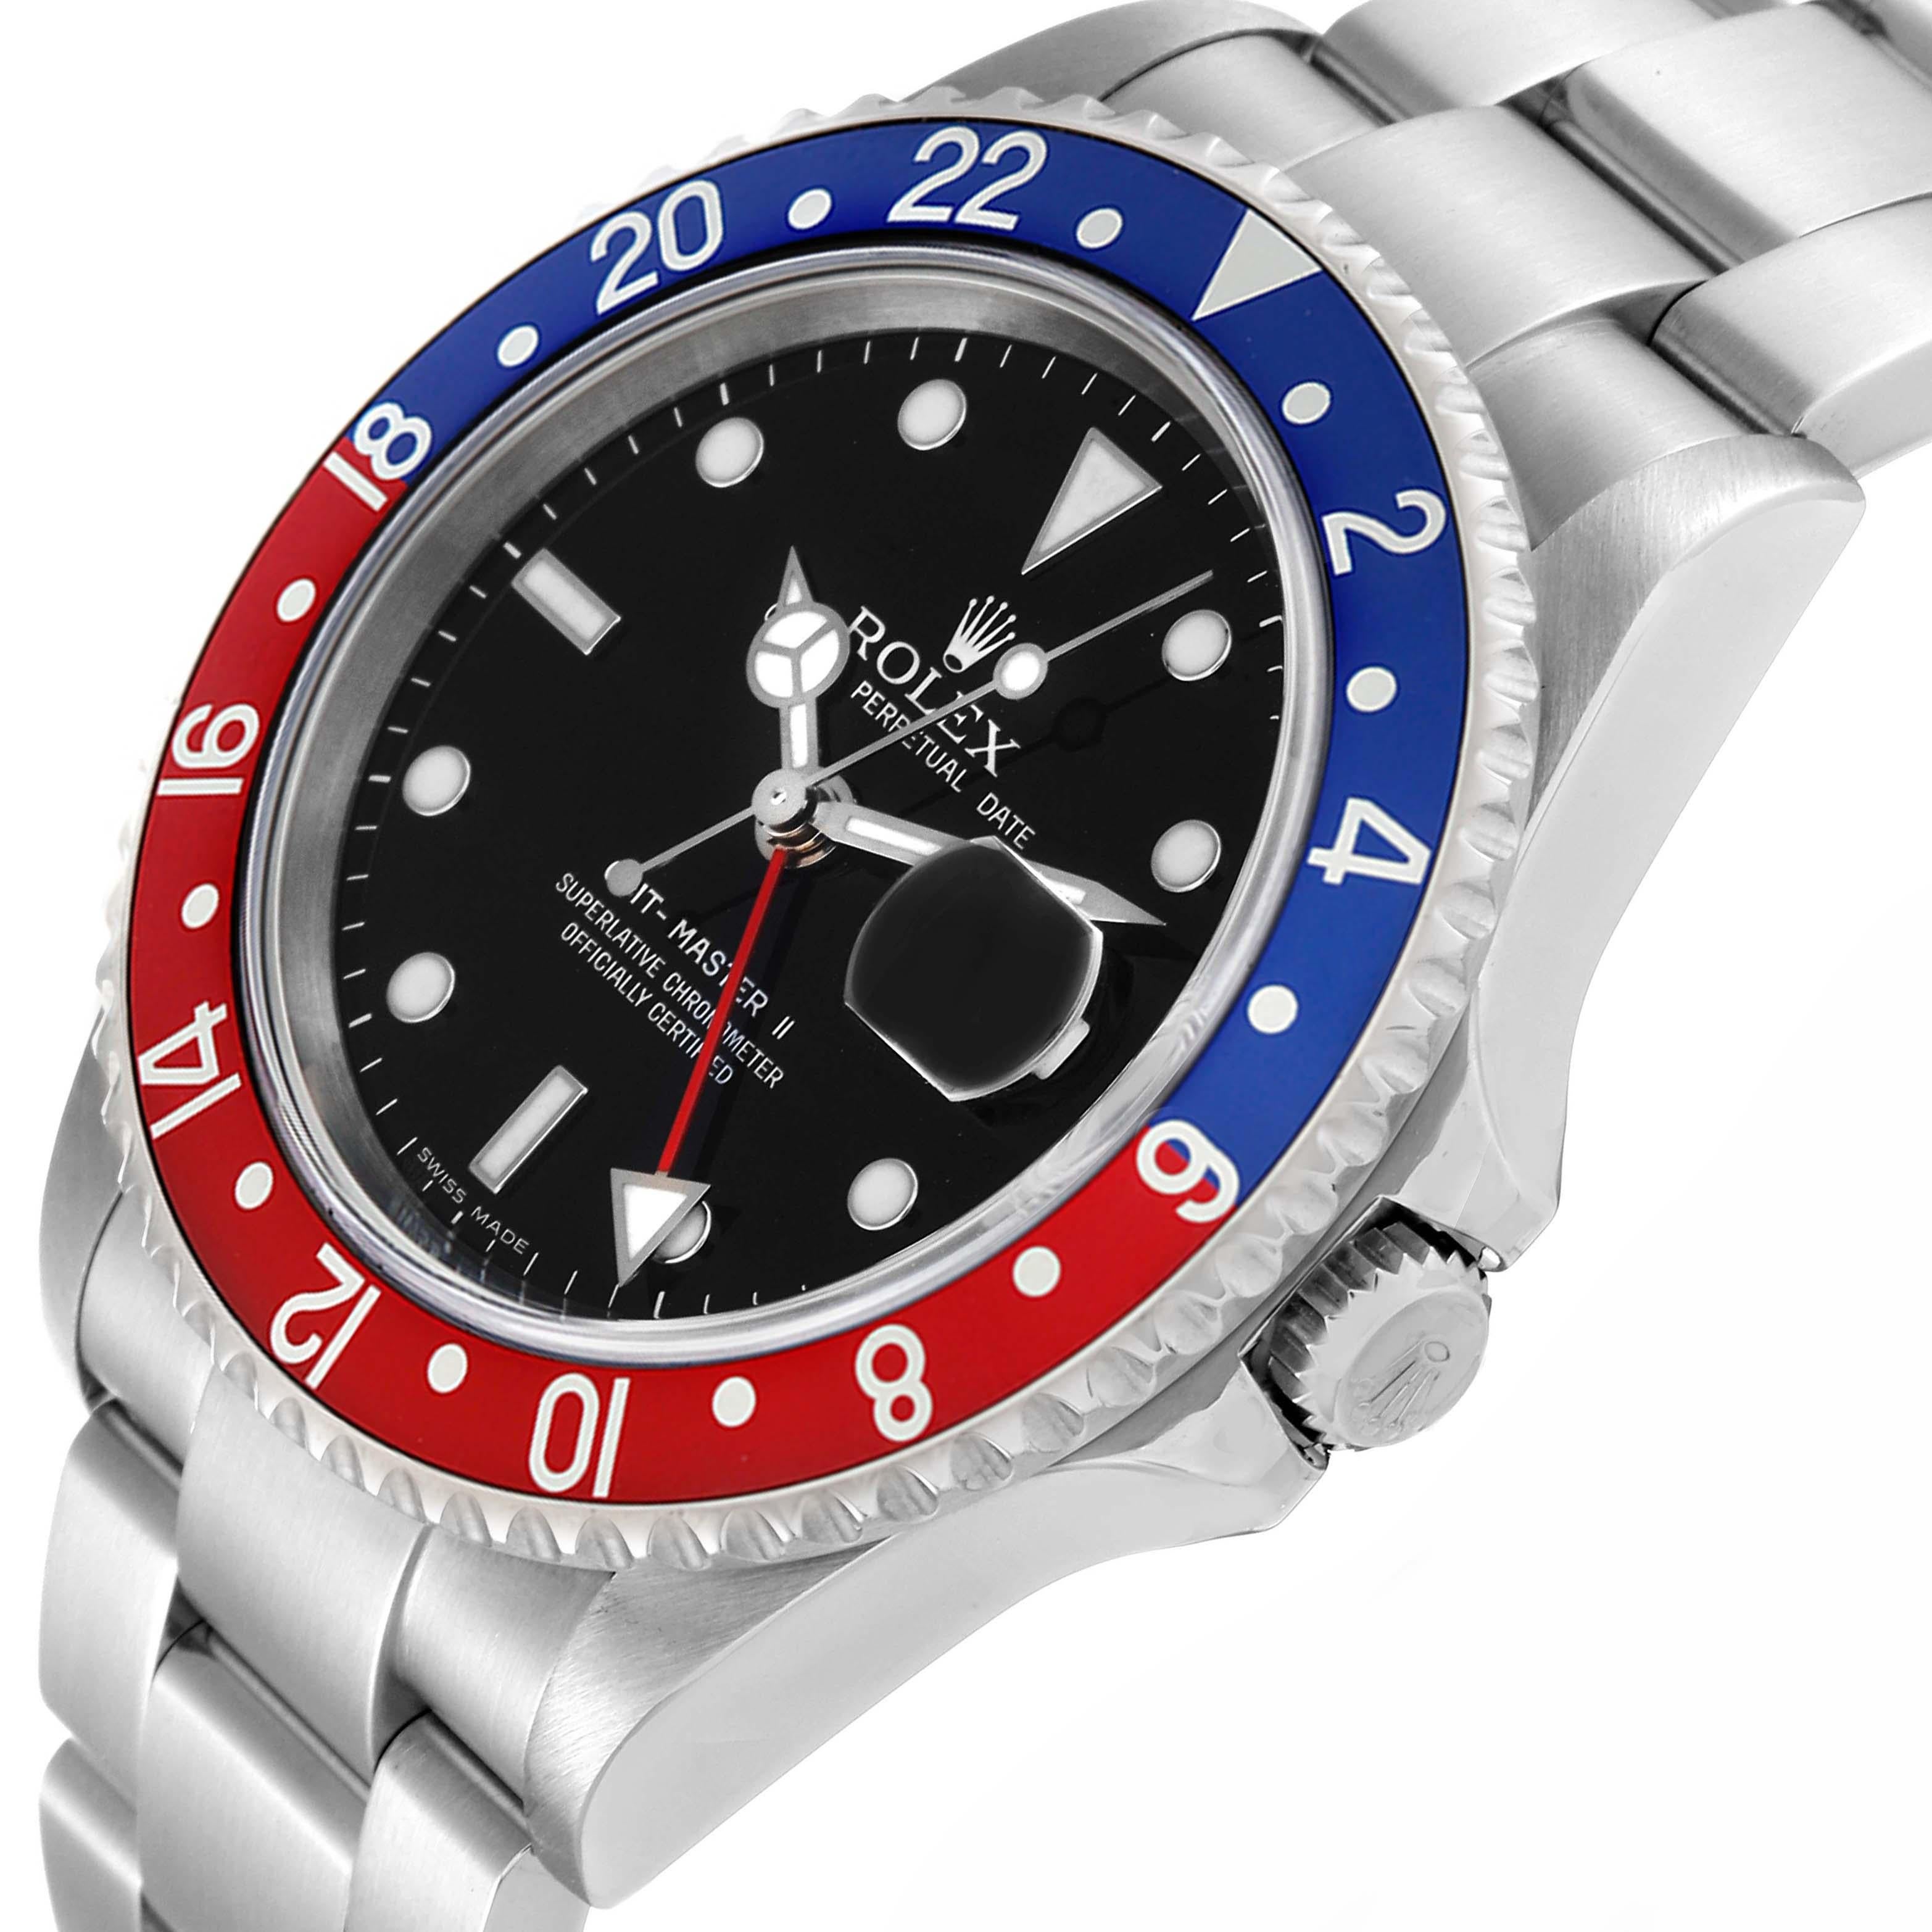 Men's Rolex GMT Master II Blue Red Pepsi Error Dial Steel Mens Watch 16710 Box Papers For Sale